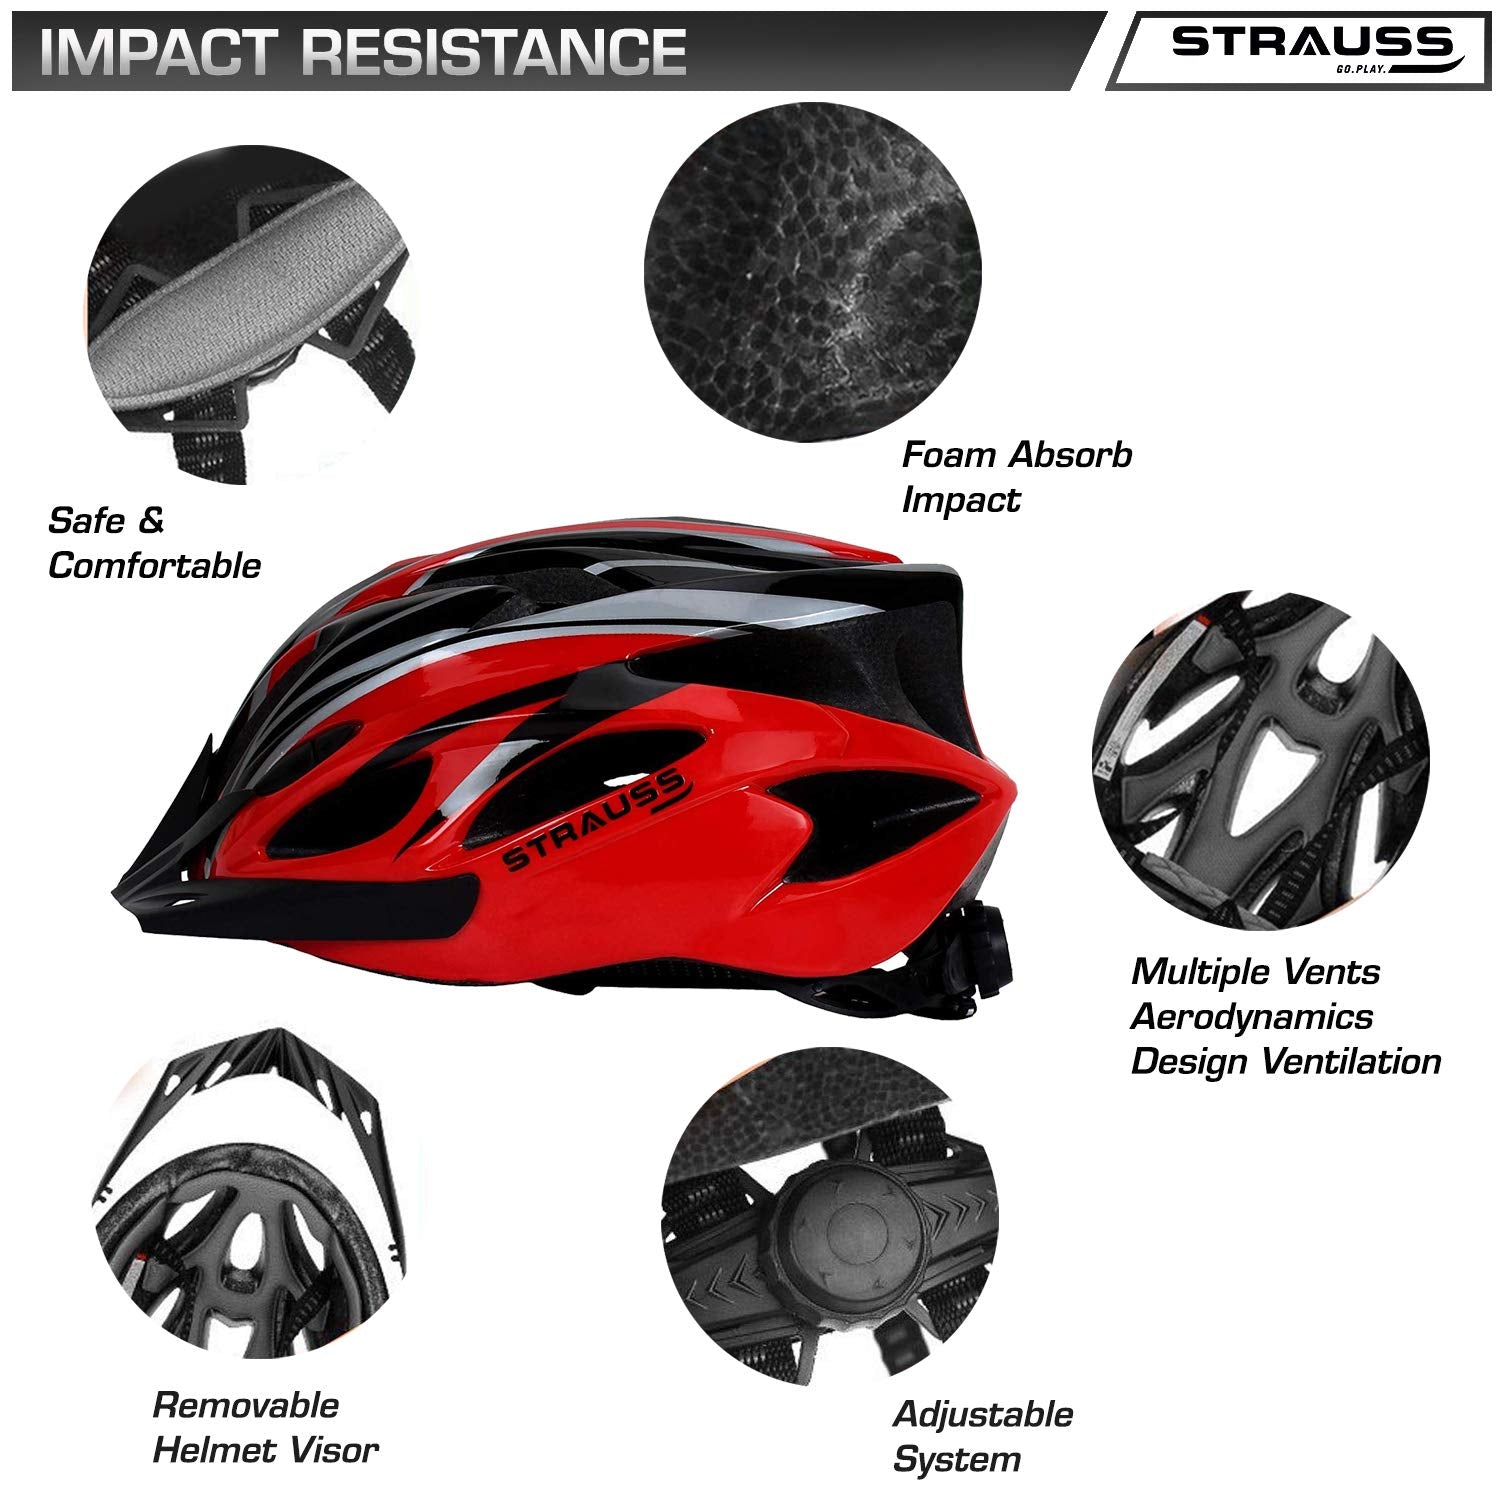 Strauss Adjustable Cycling Helmet with Detachable Visor | Light Weight with Superior Ventilation | Mountain, Road Bike & Skating Helmet With Premium EPS Foam Lining & ABS Shell | Ideal for Adults and Kids, (Black/Red))